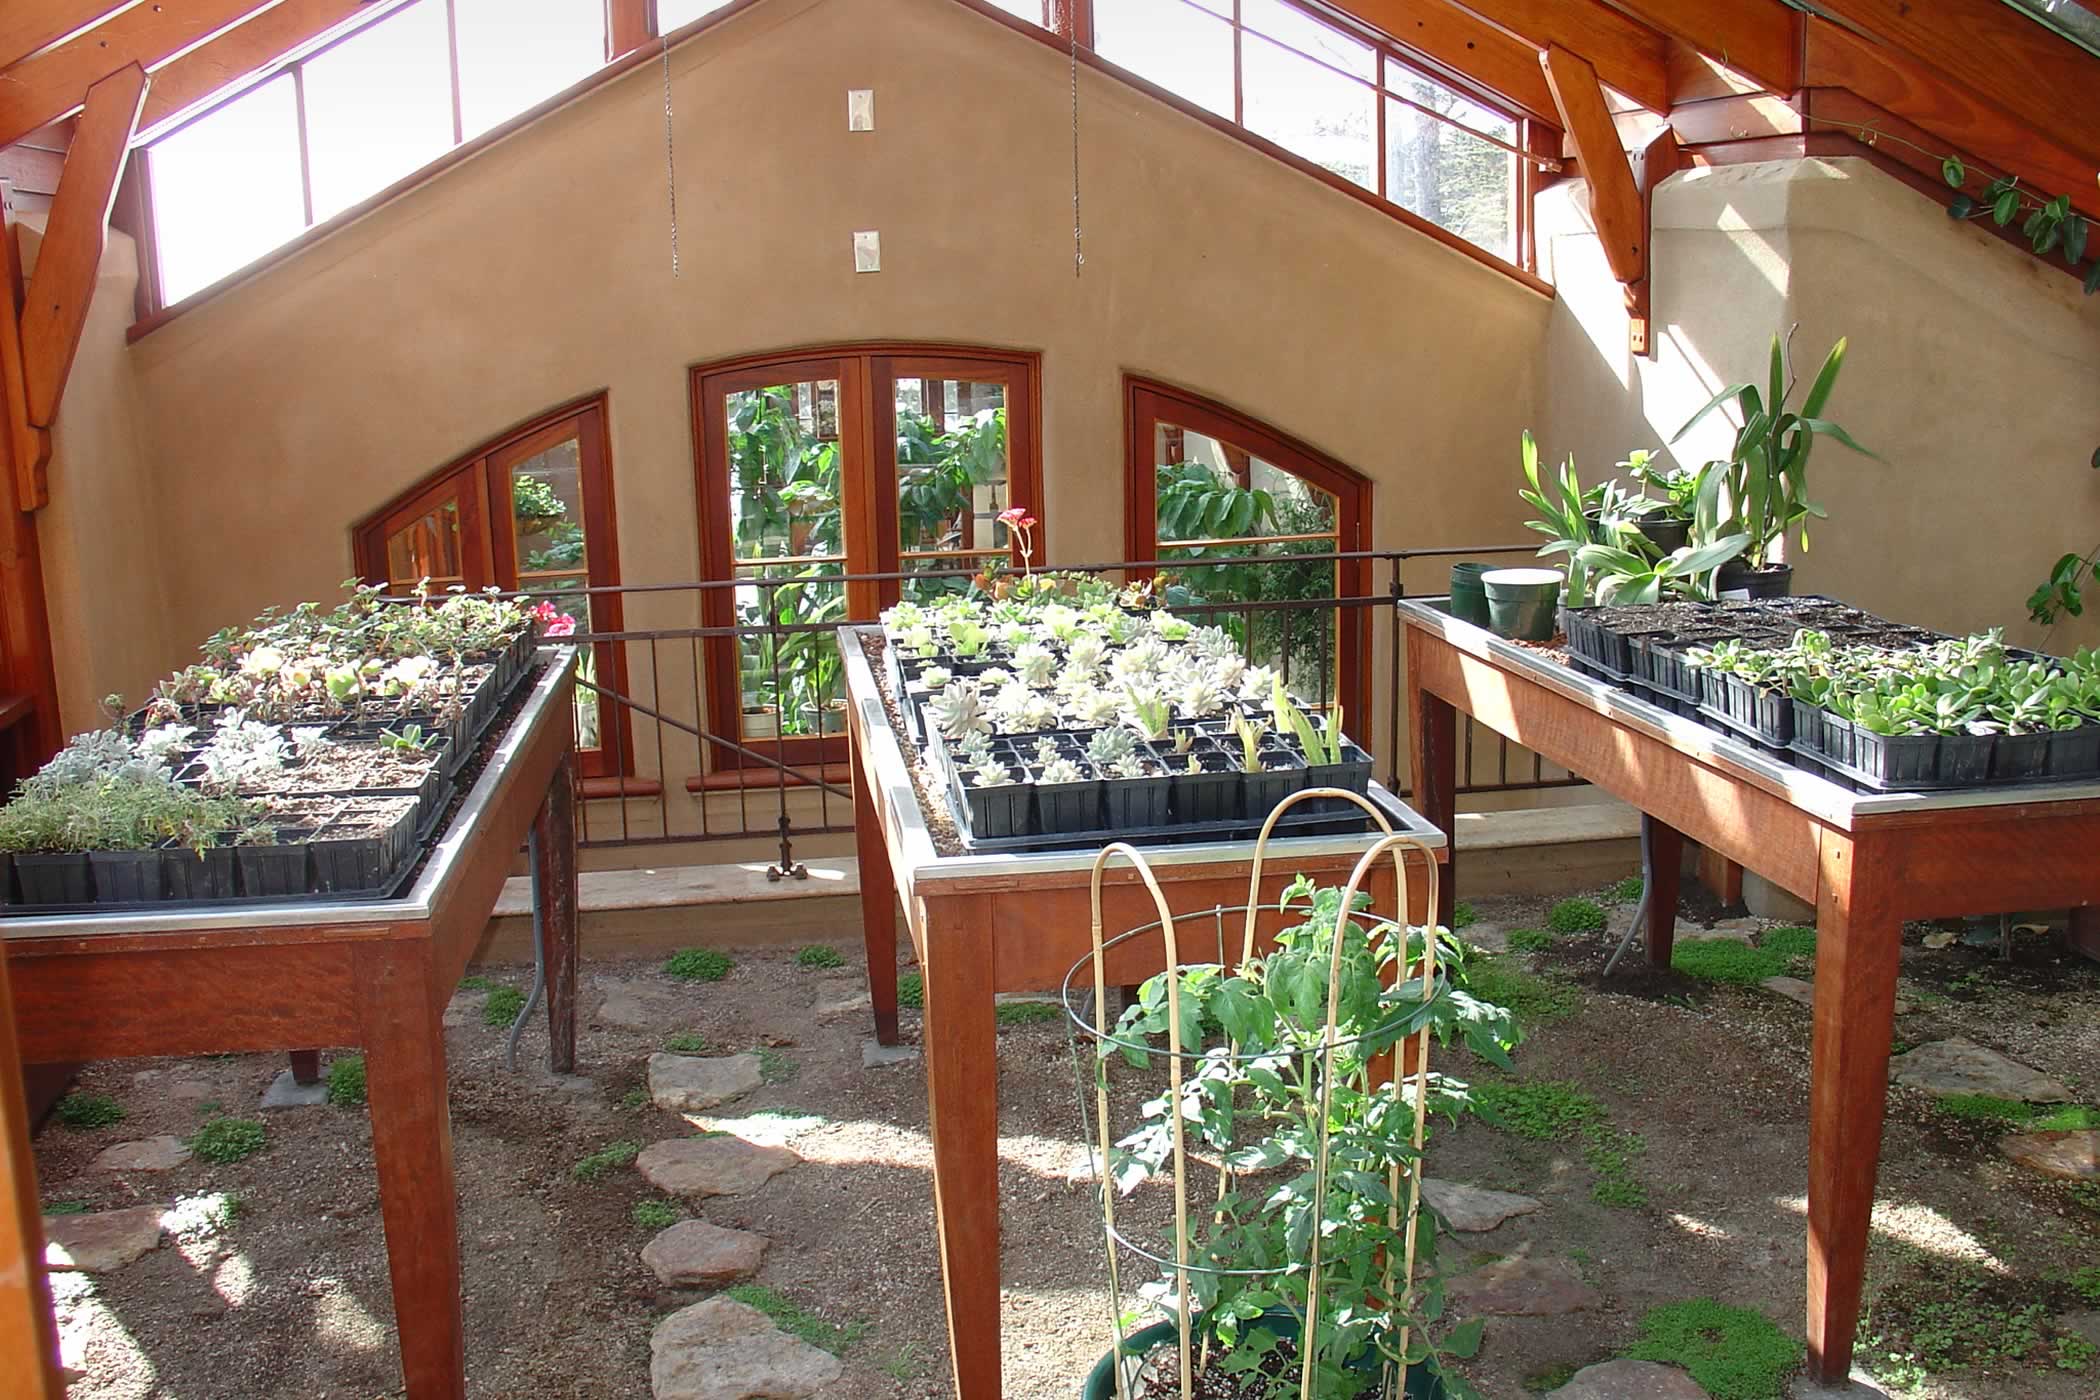 The James House Greenhouse, Carmel Highlands, California: A recycled eucalyptus hardwood timber roof structure, window frames and seedling propagation tables combine with an earth floor and stone flags in the propagation room.